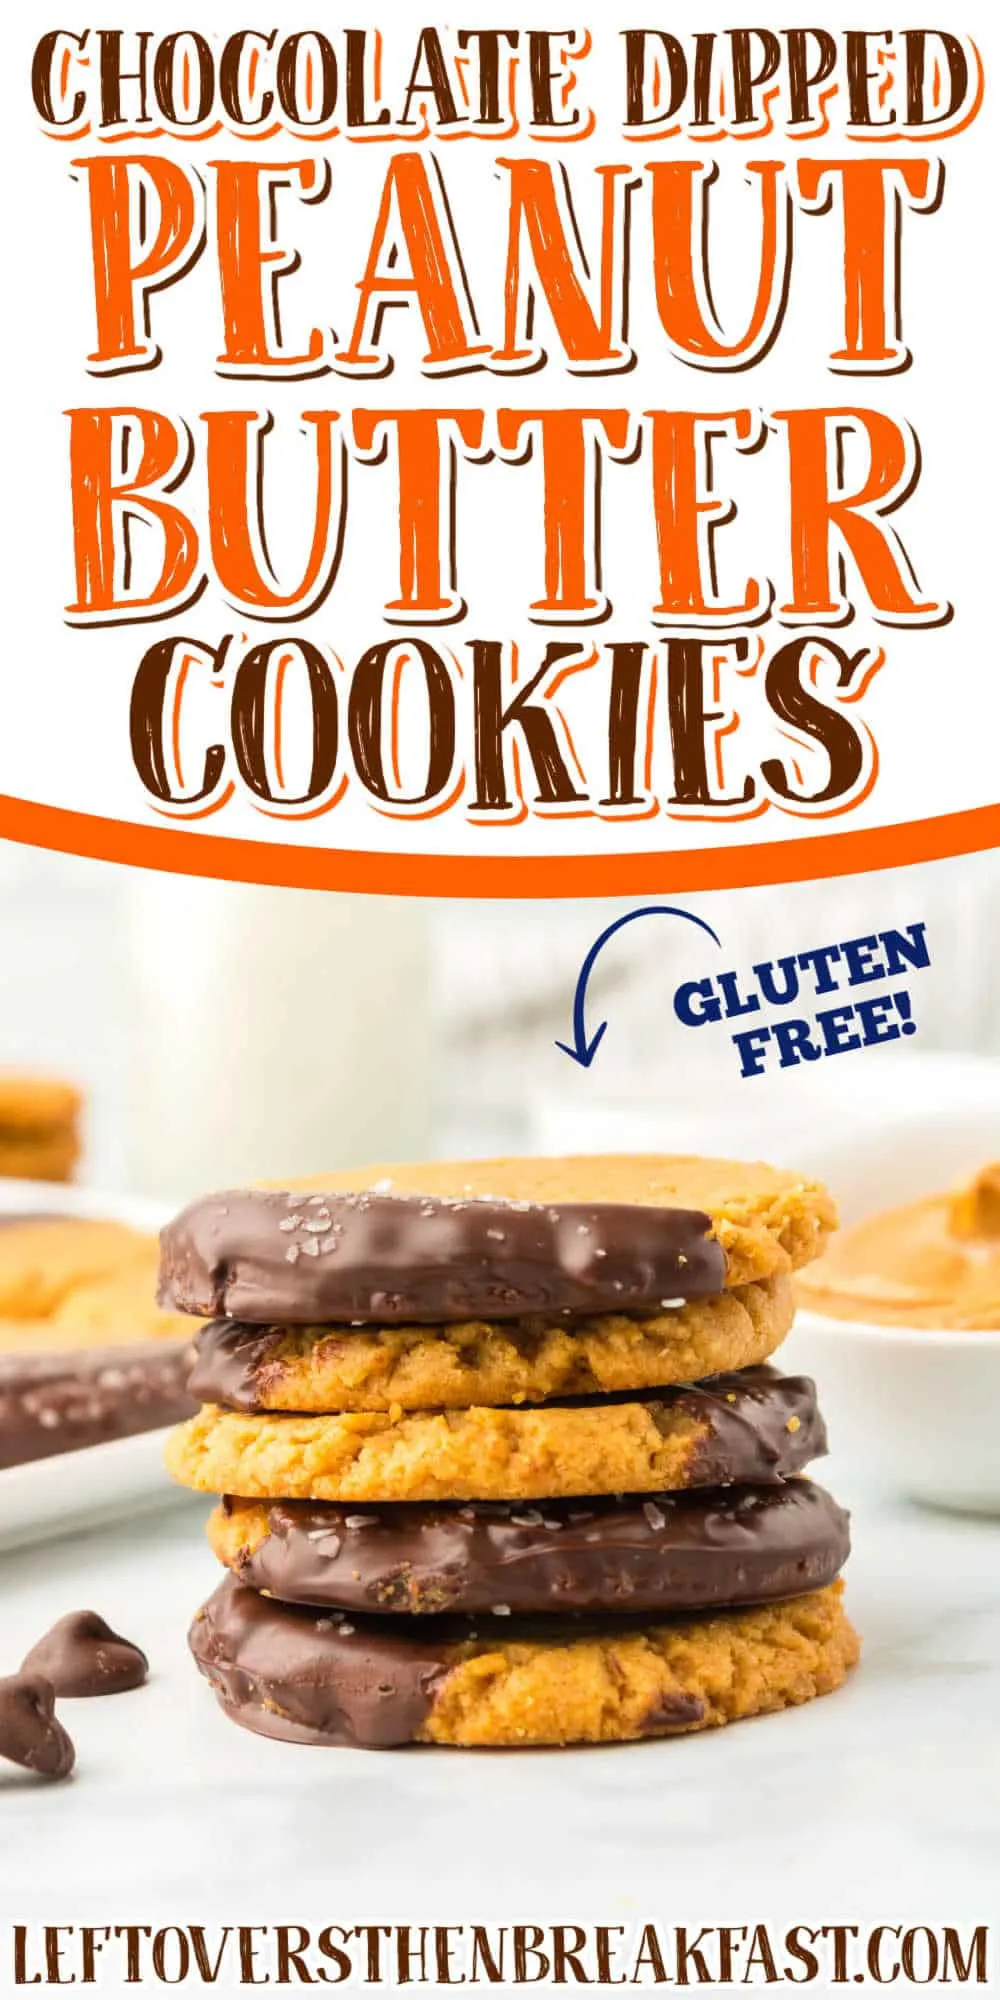 stack of cookies with text "gluten free"